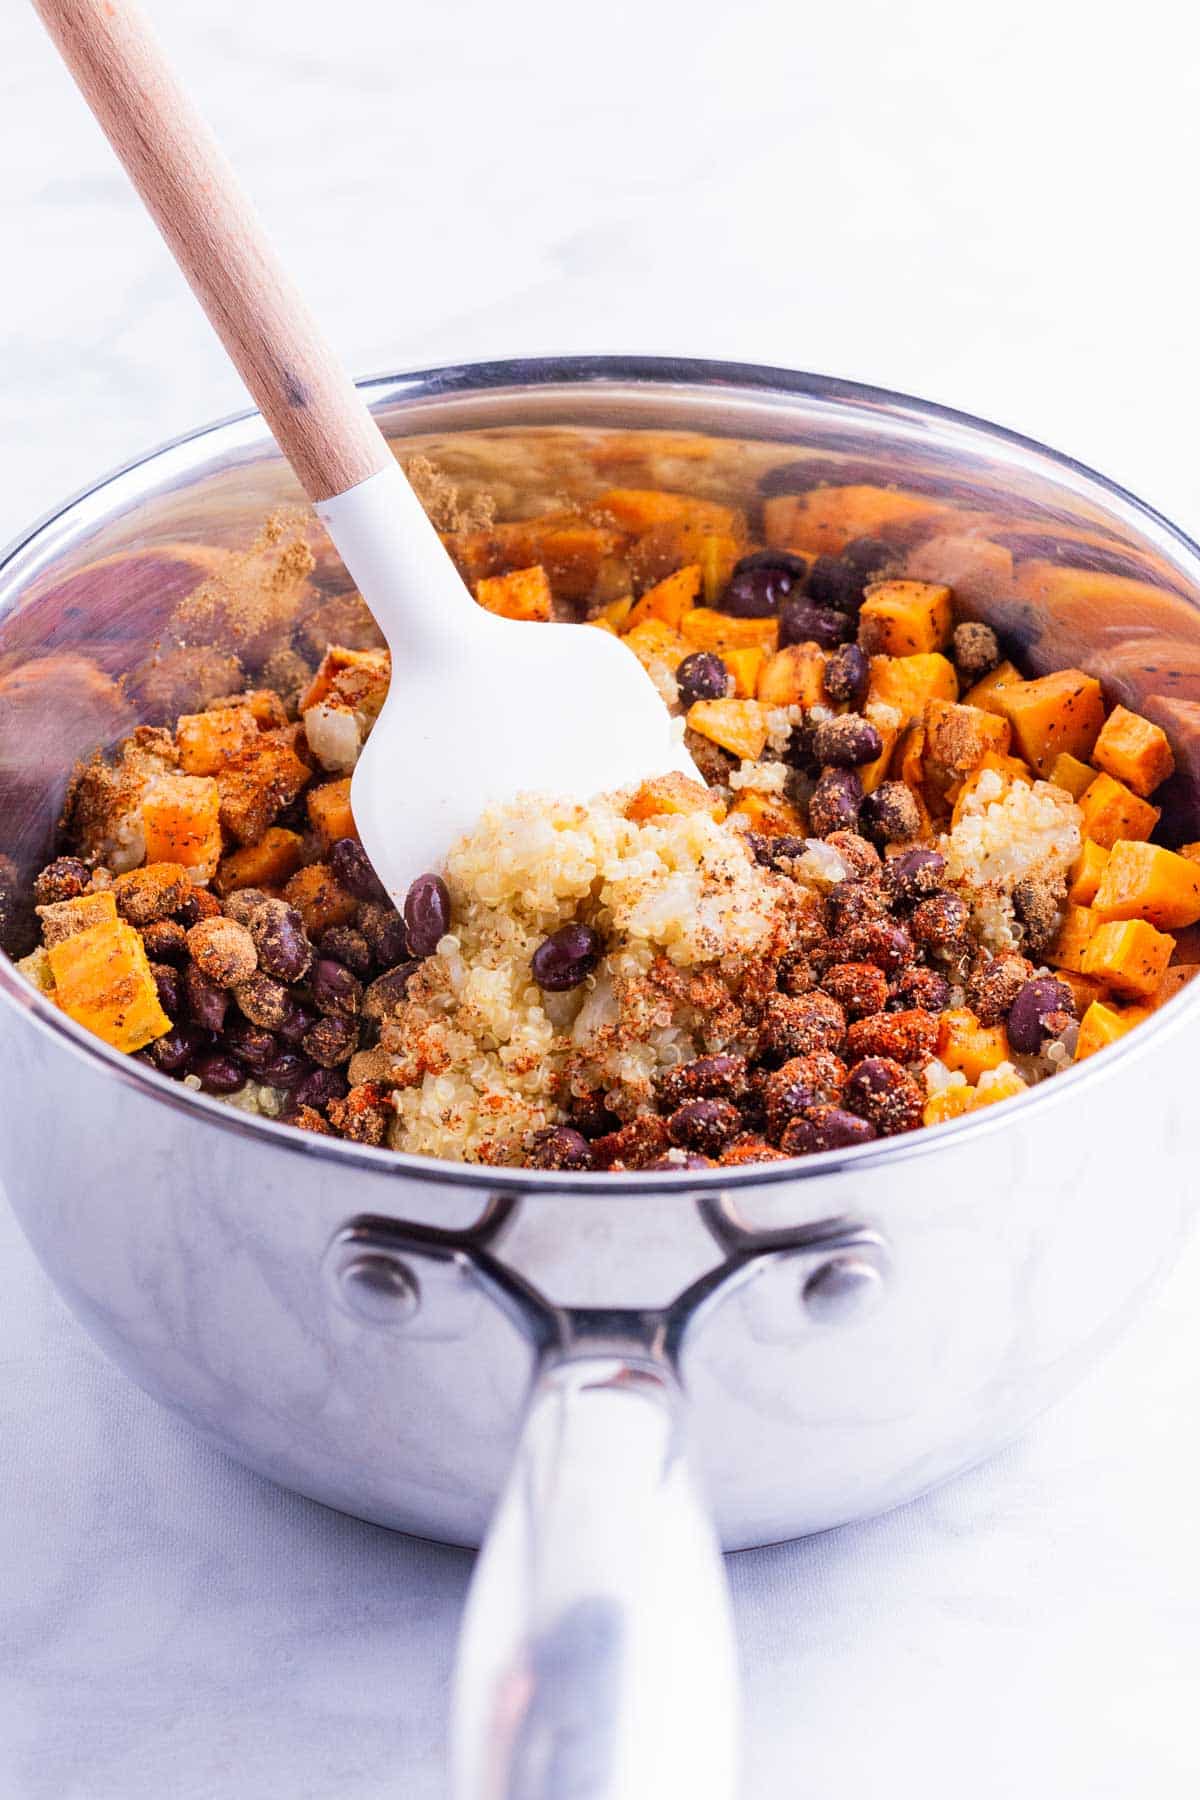 Black beans and sweet potato are stirred into the filling mixture.